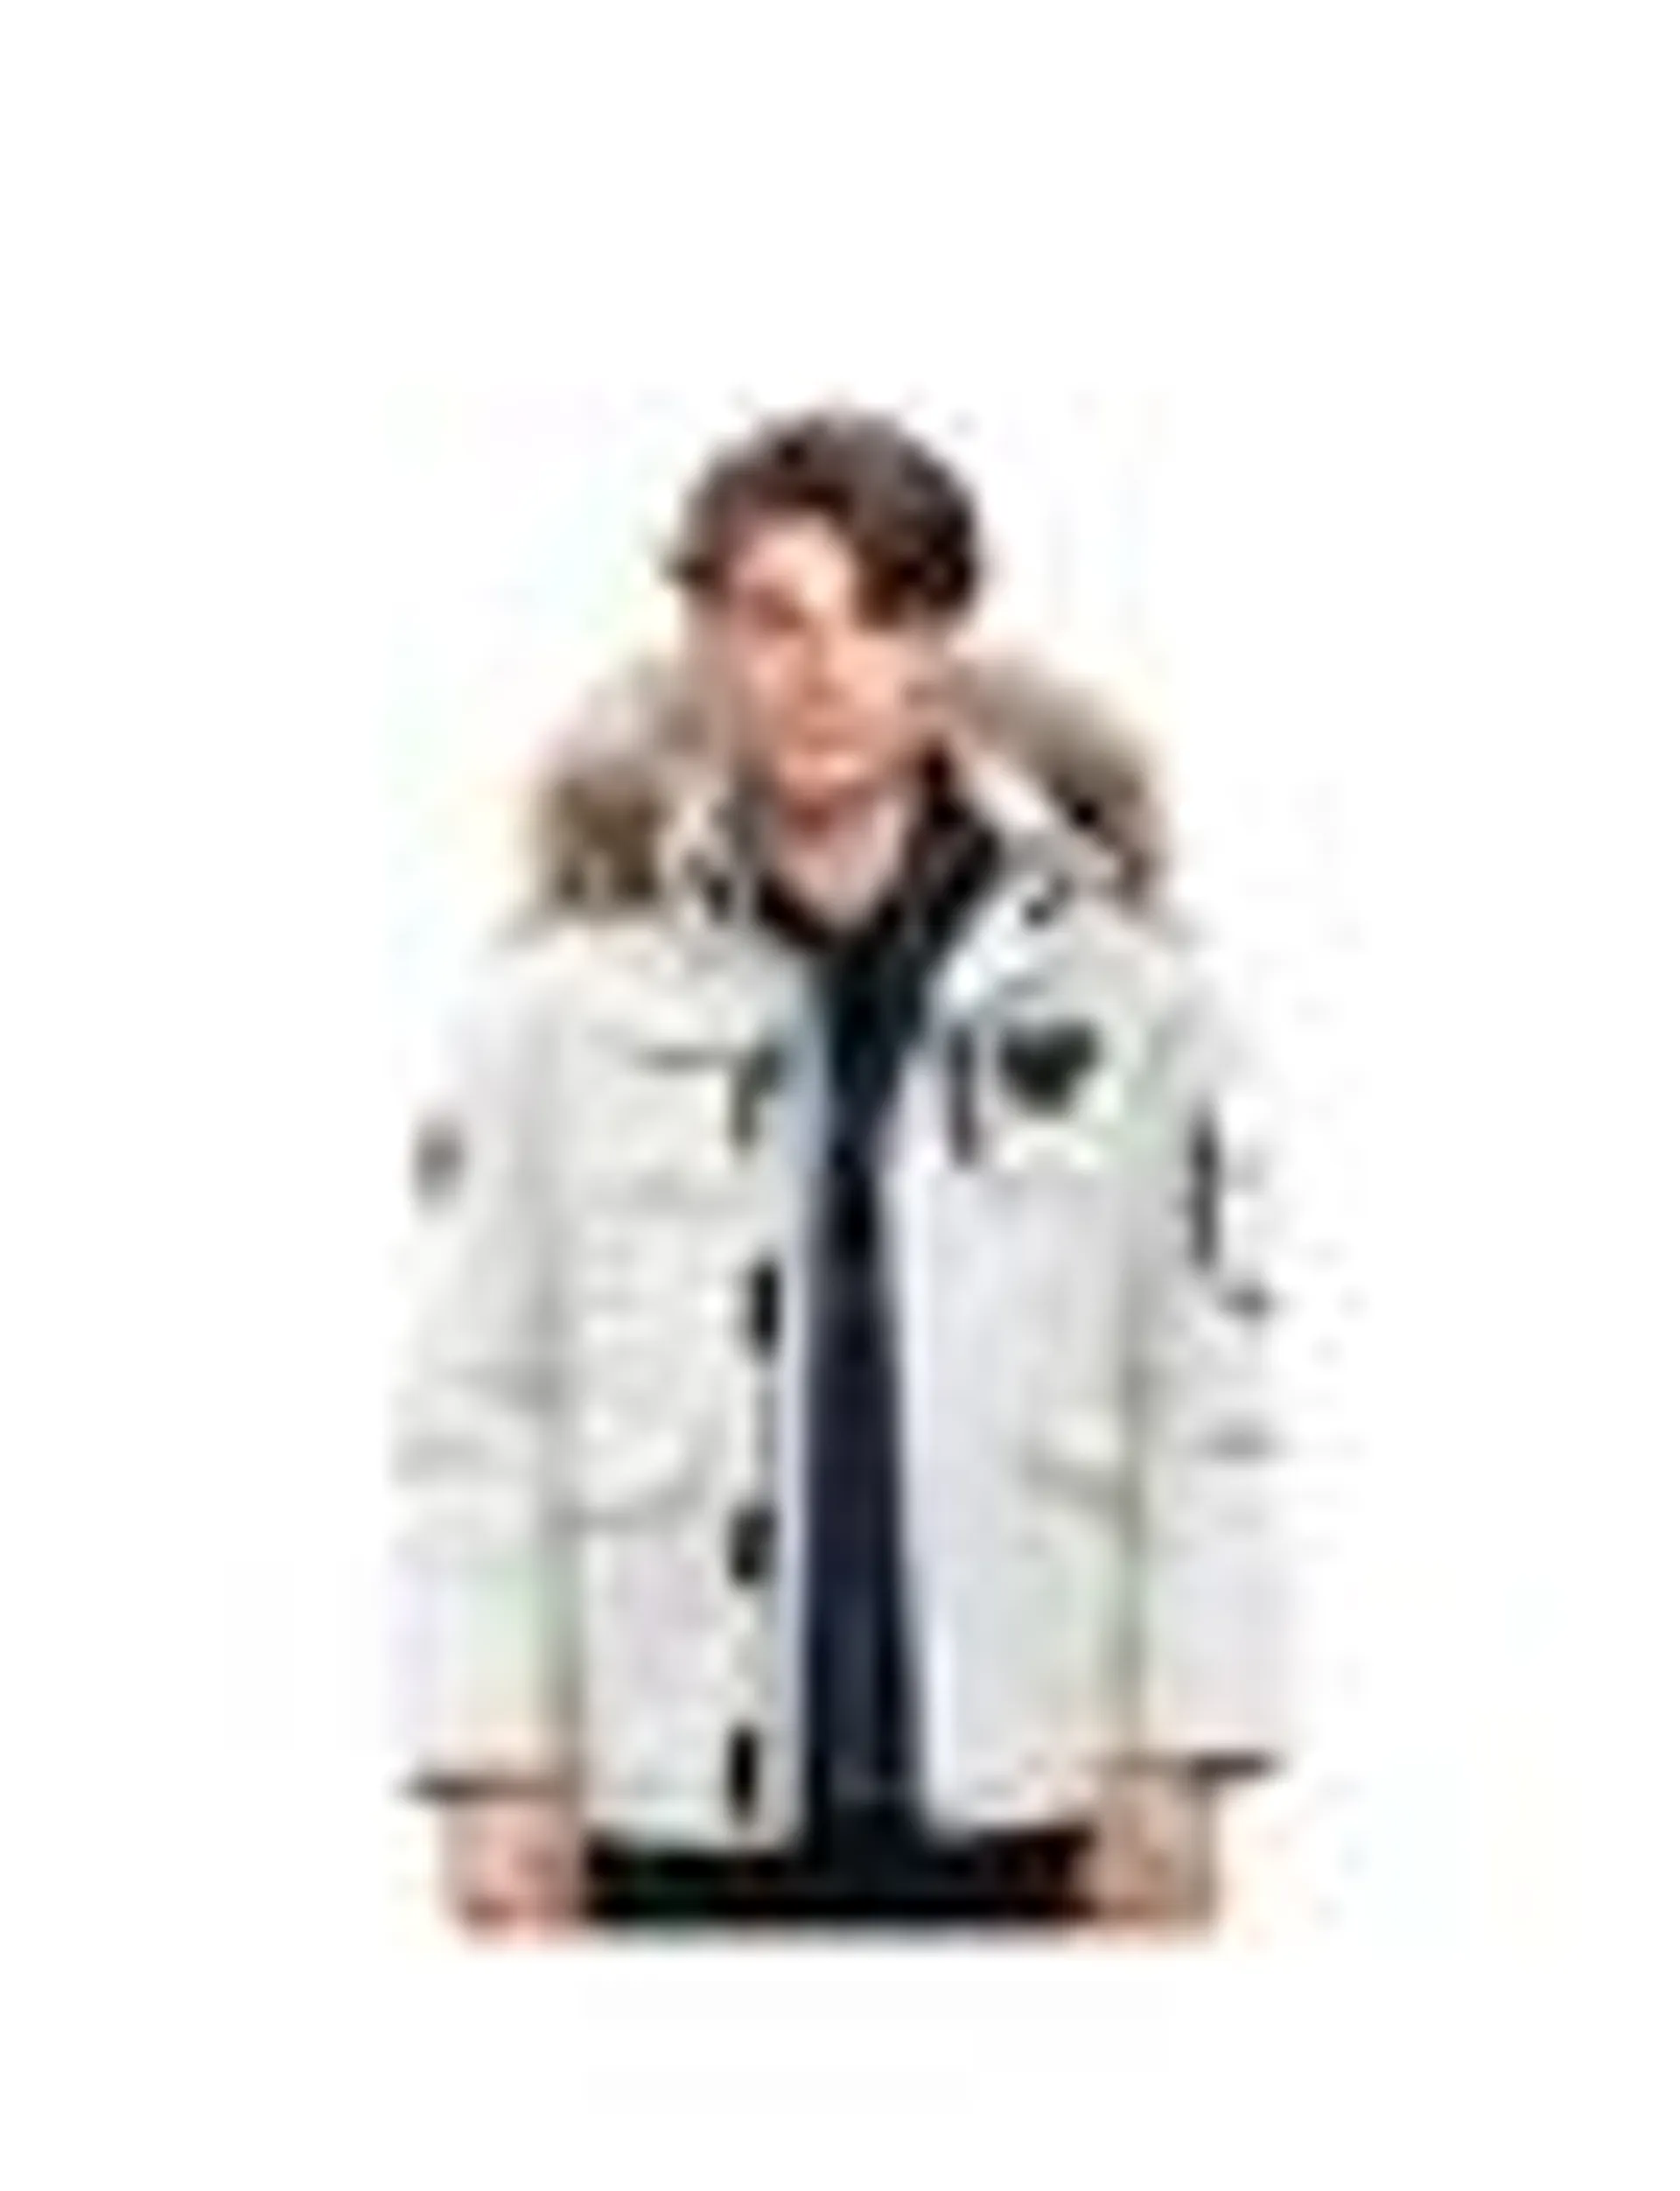 abbee White 3XL Winter Fur Hooded Down Jacket Stylish Lightweight Quilted Warm Puffer Coat